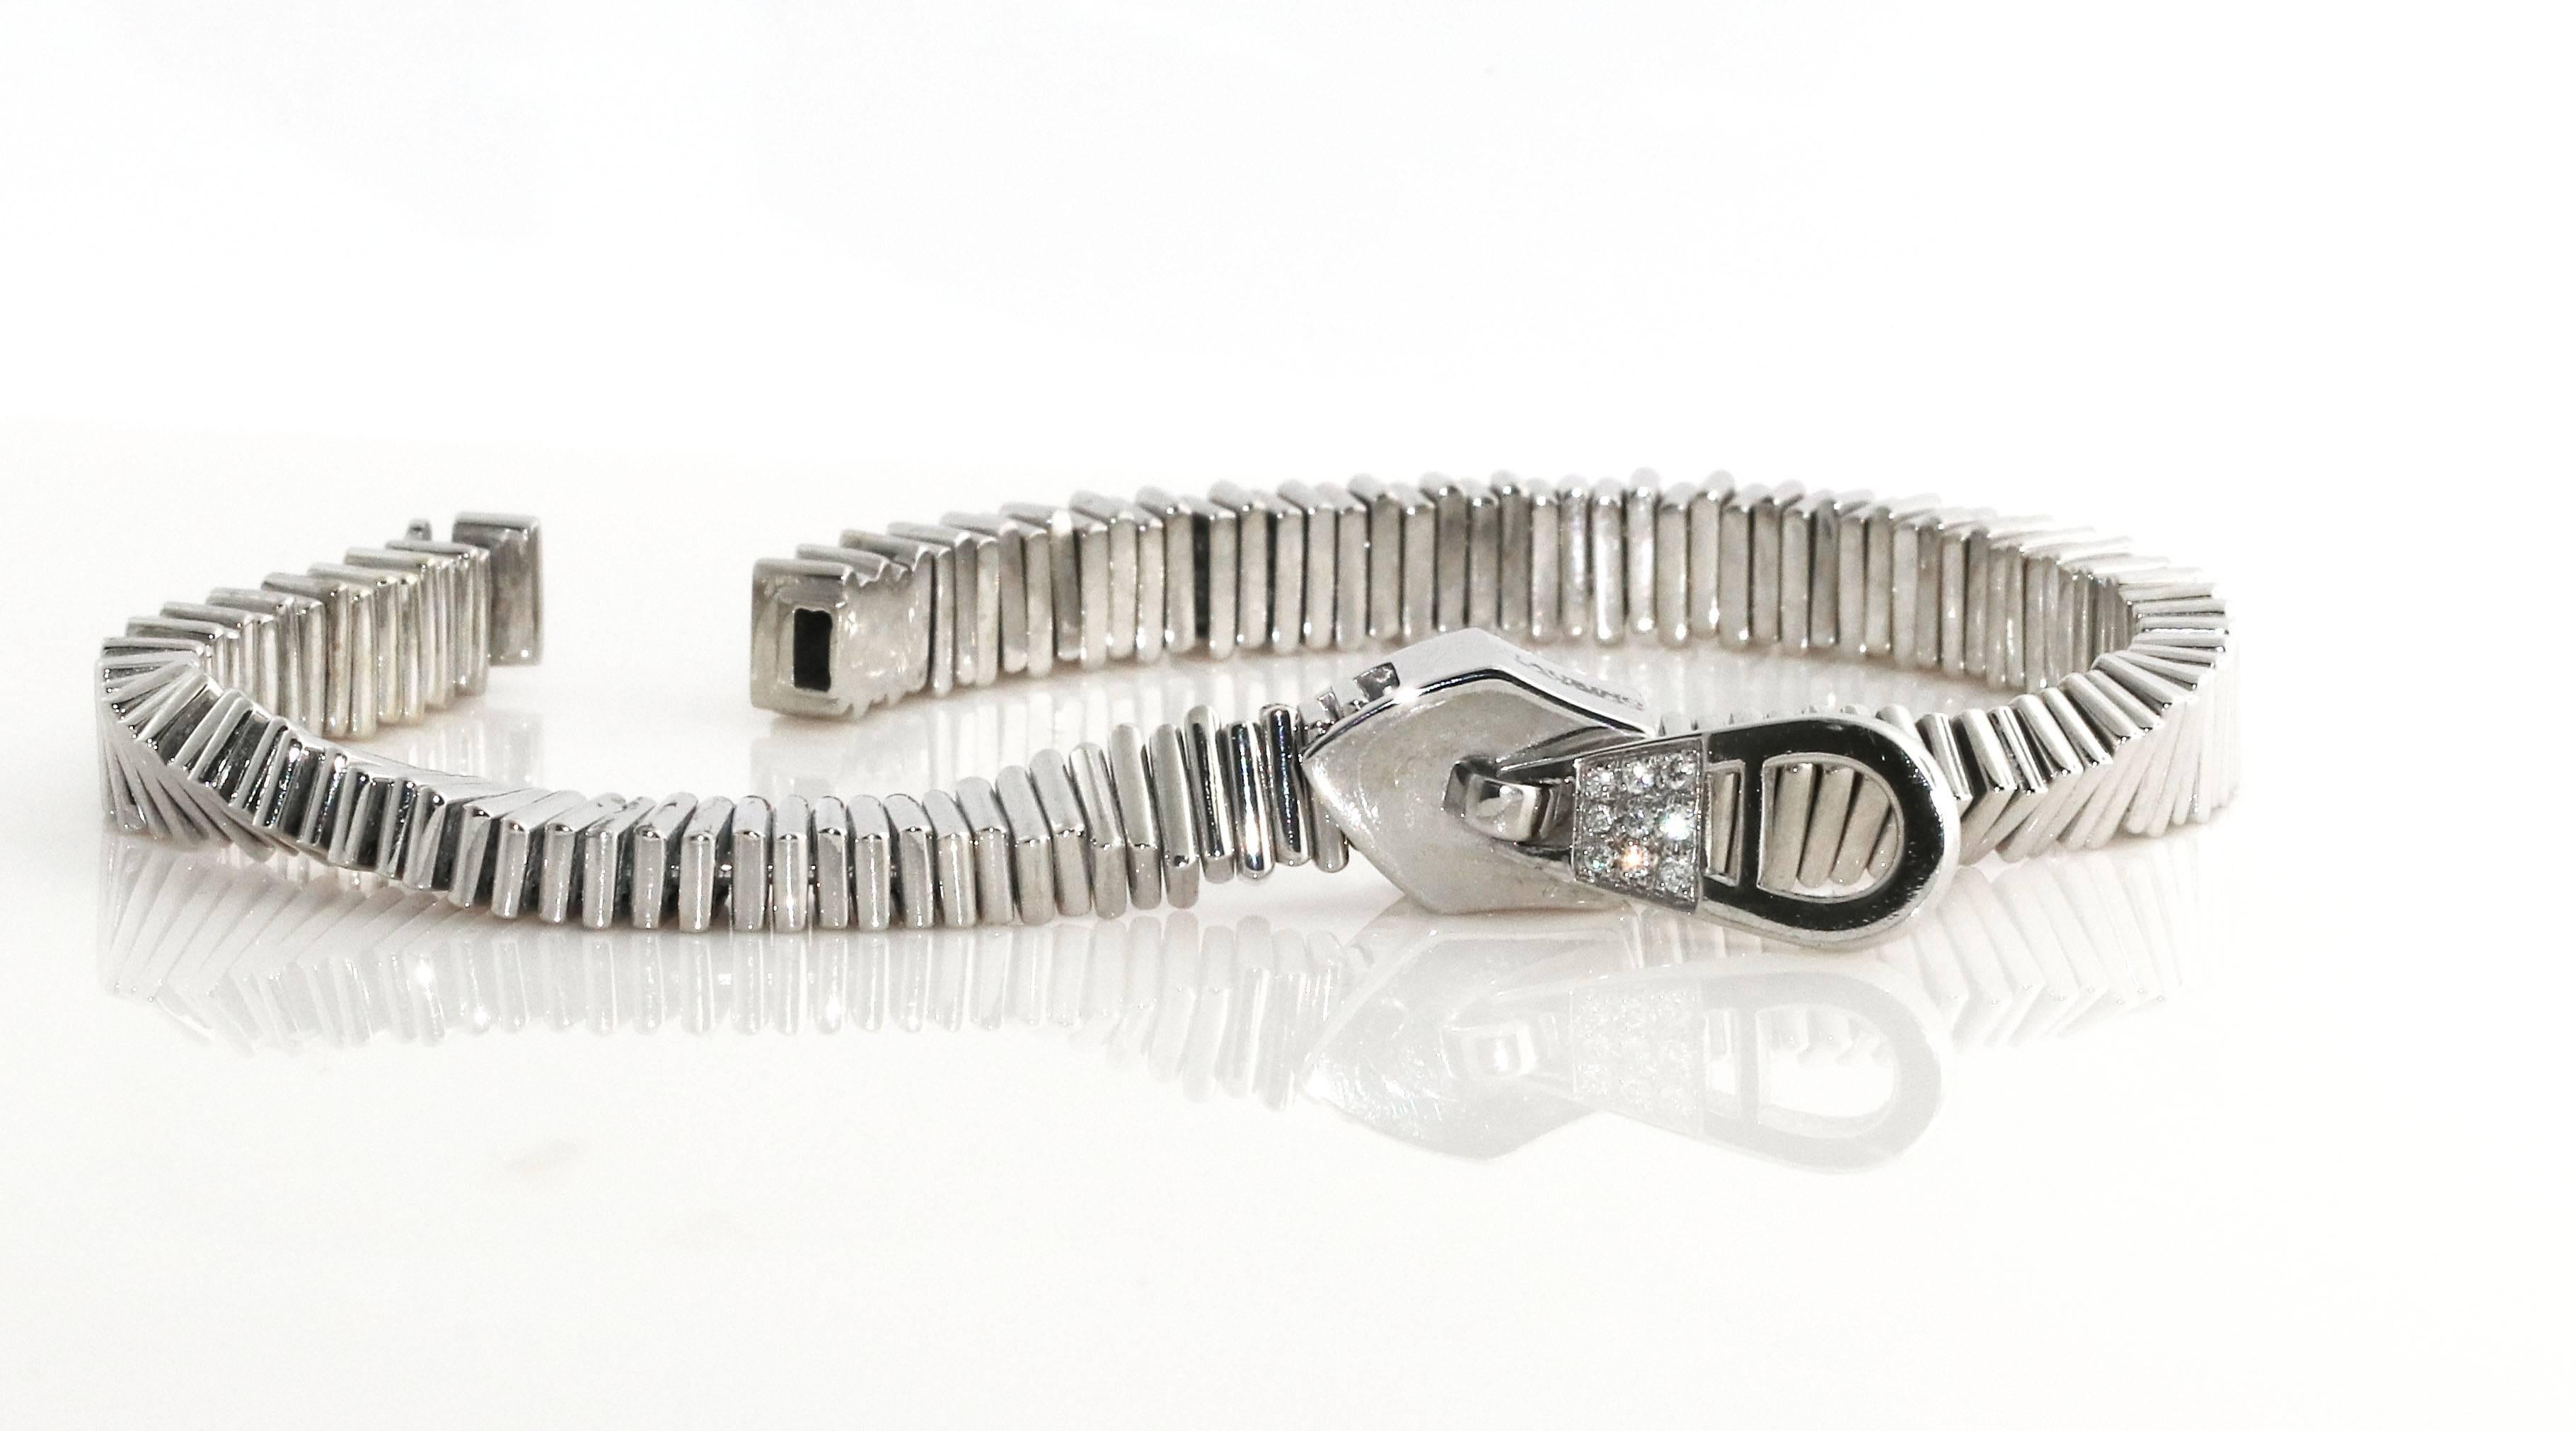 Such a cool and unique bracelet. This Italian made Staurino Fratelli white gold and diamond zipper bracelet. This is exquisitely made and is truly unique. The flex in the zipper makes for a super special piece. The diamonds on the zipper tongue make